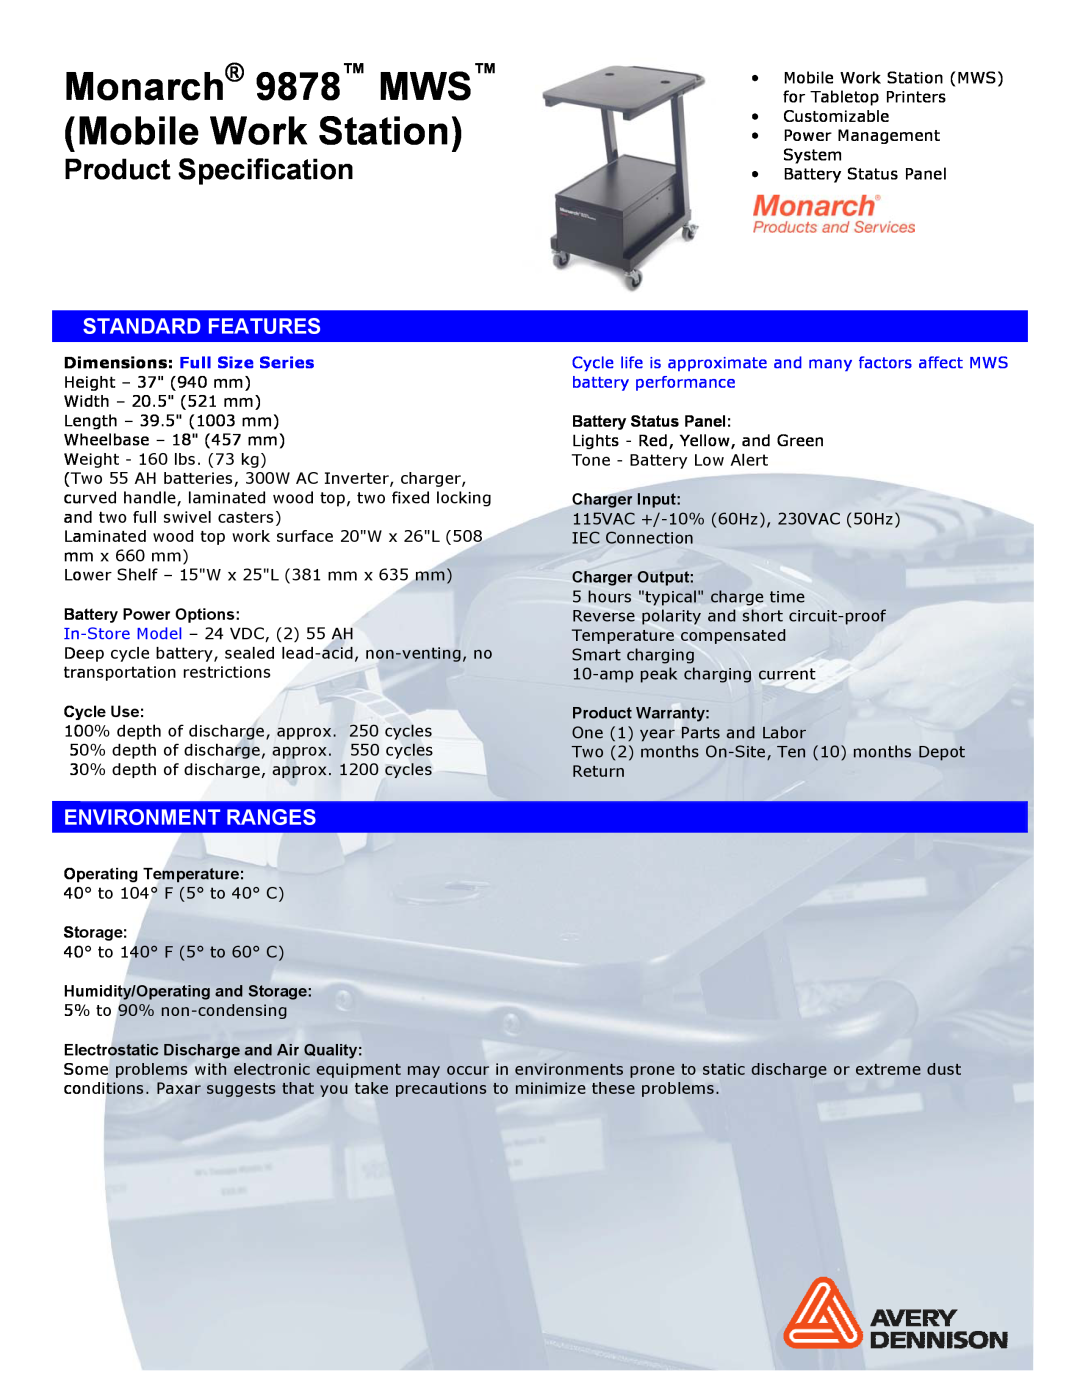 Monarch 9878 specifications Product Specification, Standard Features, Environment Ranges, Dimensions Full Size Series 